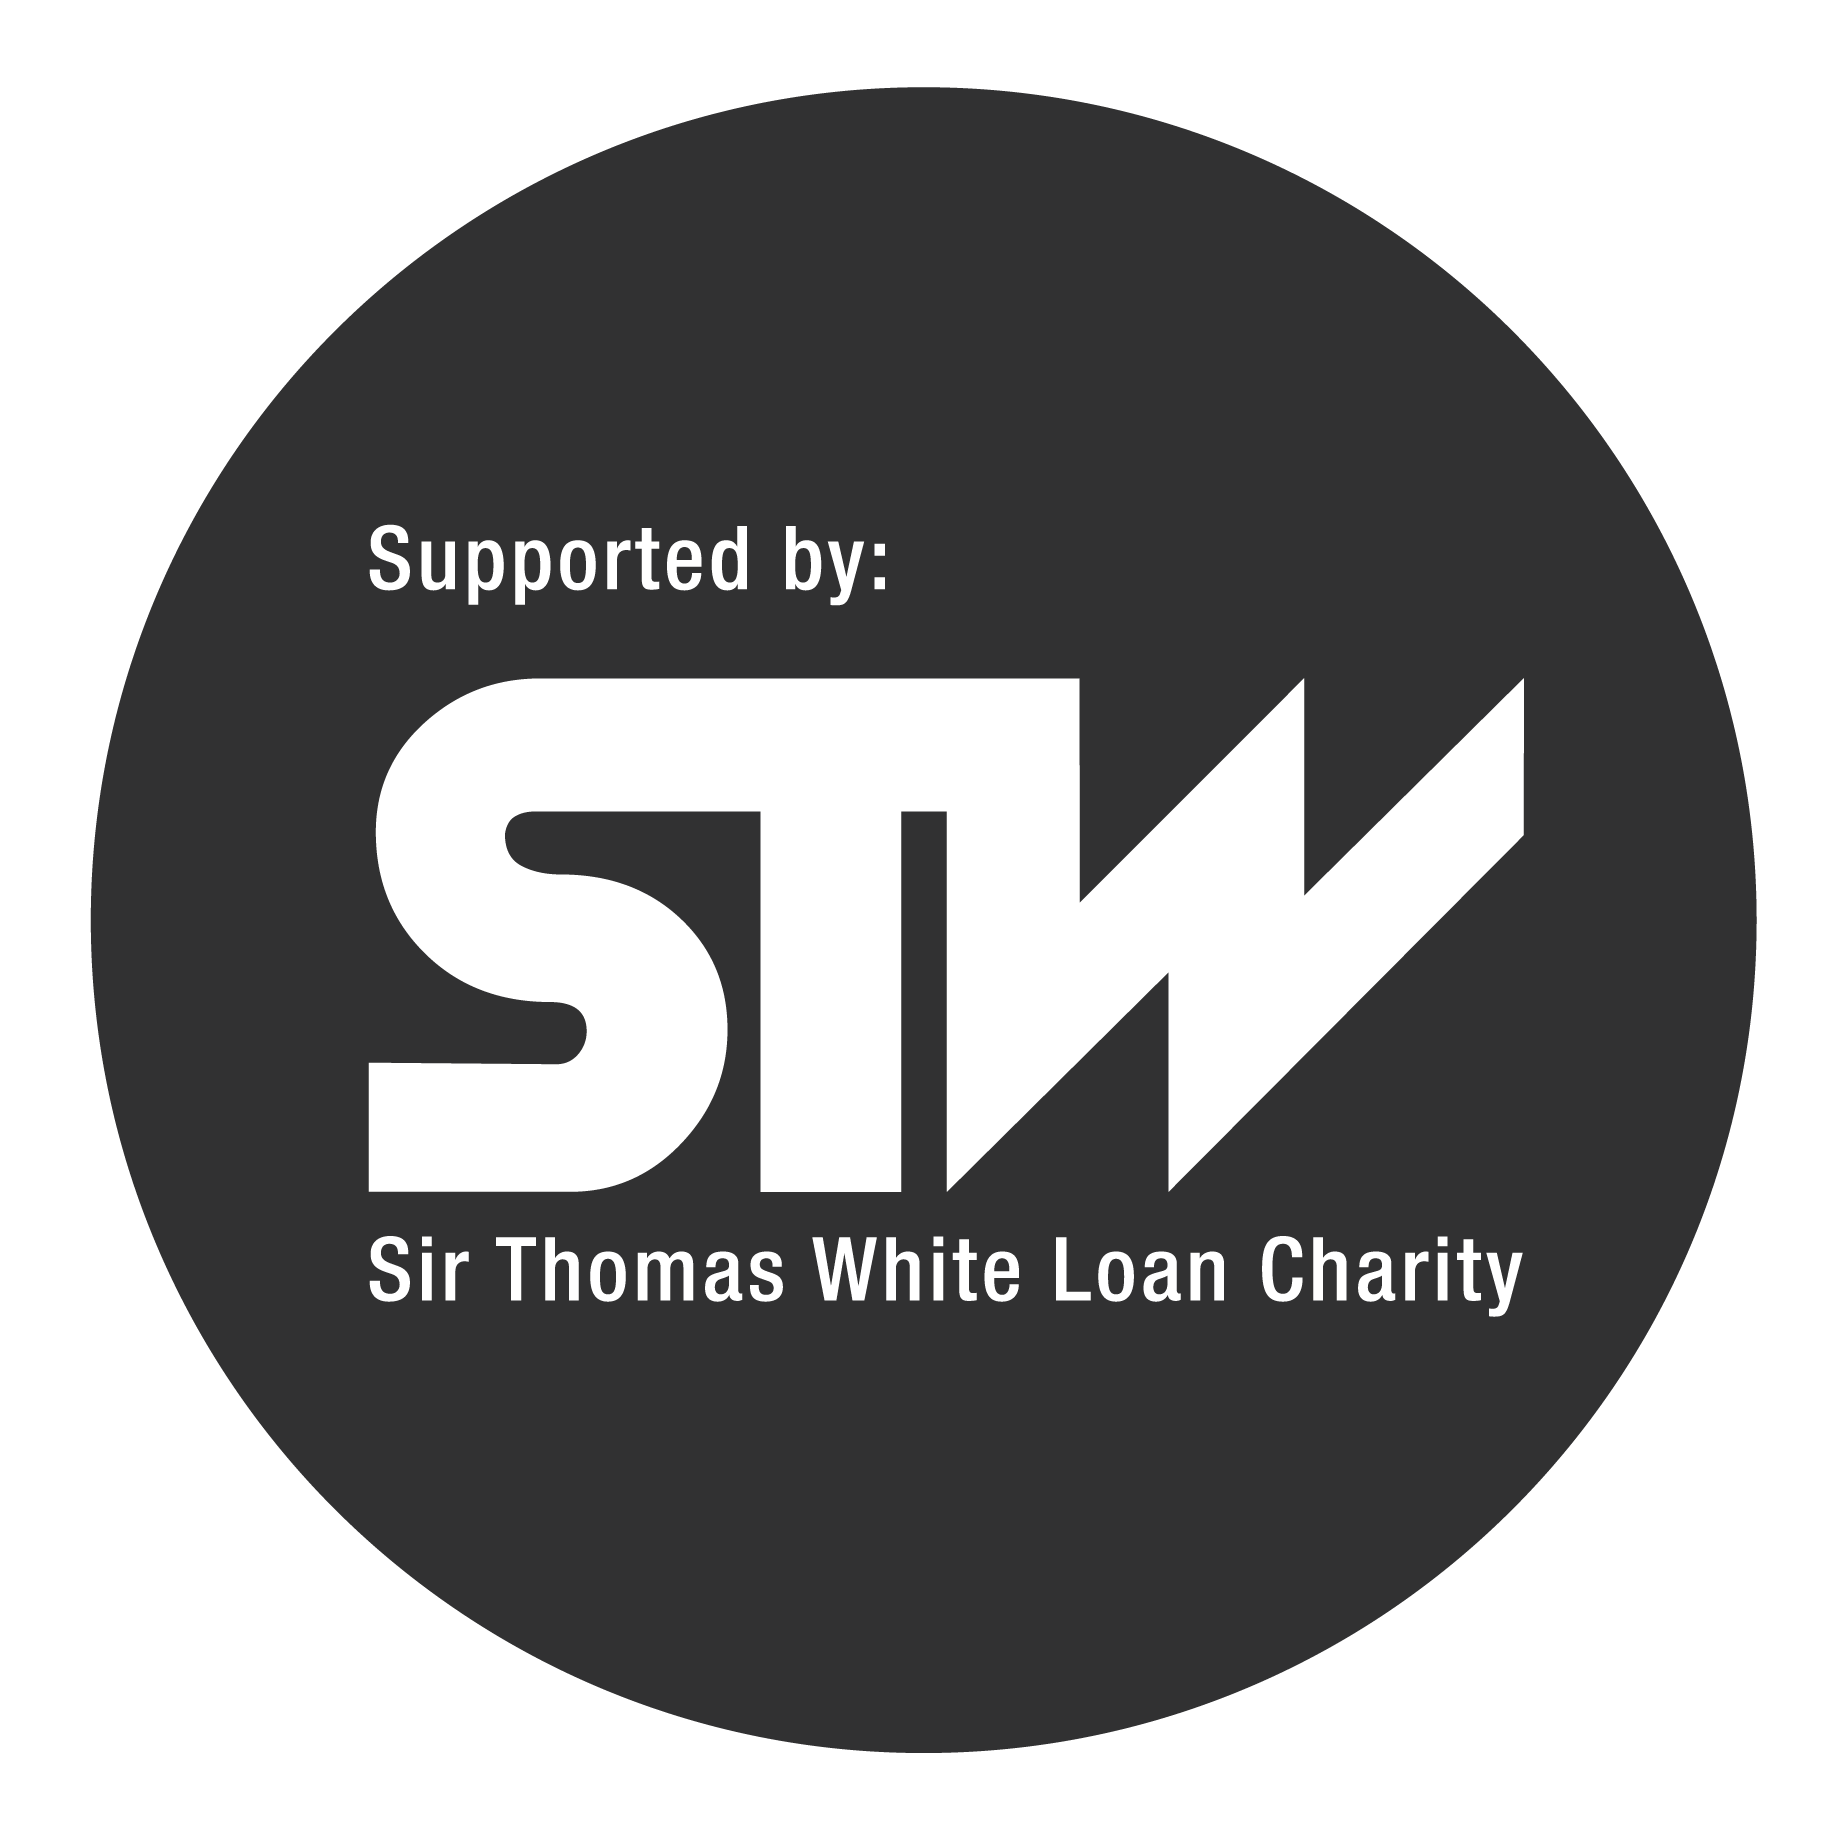 Doe Demure is supported by Sir Thomas White Loan Charity